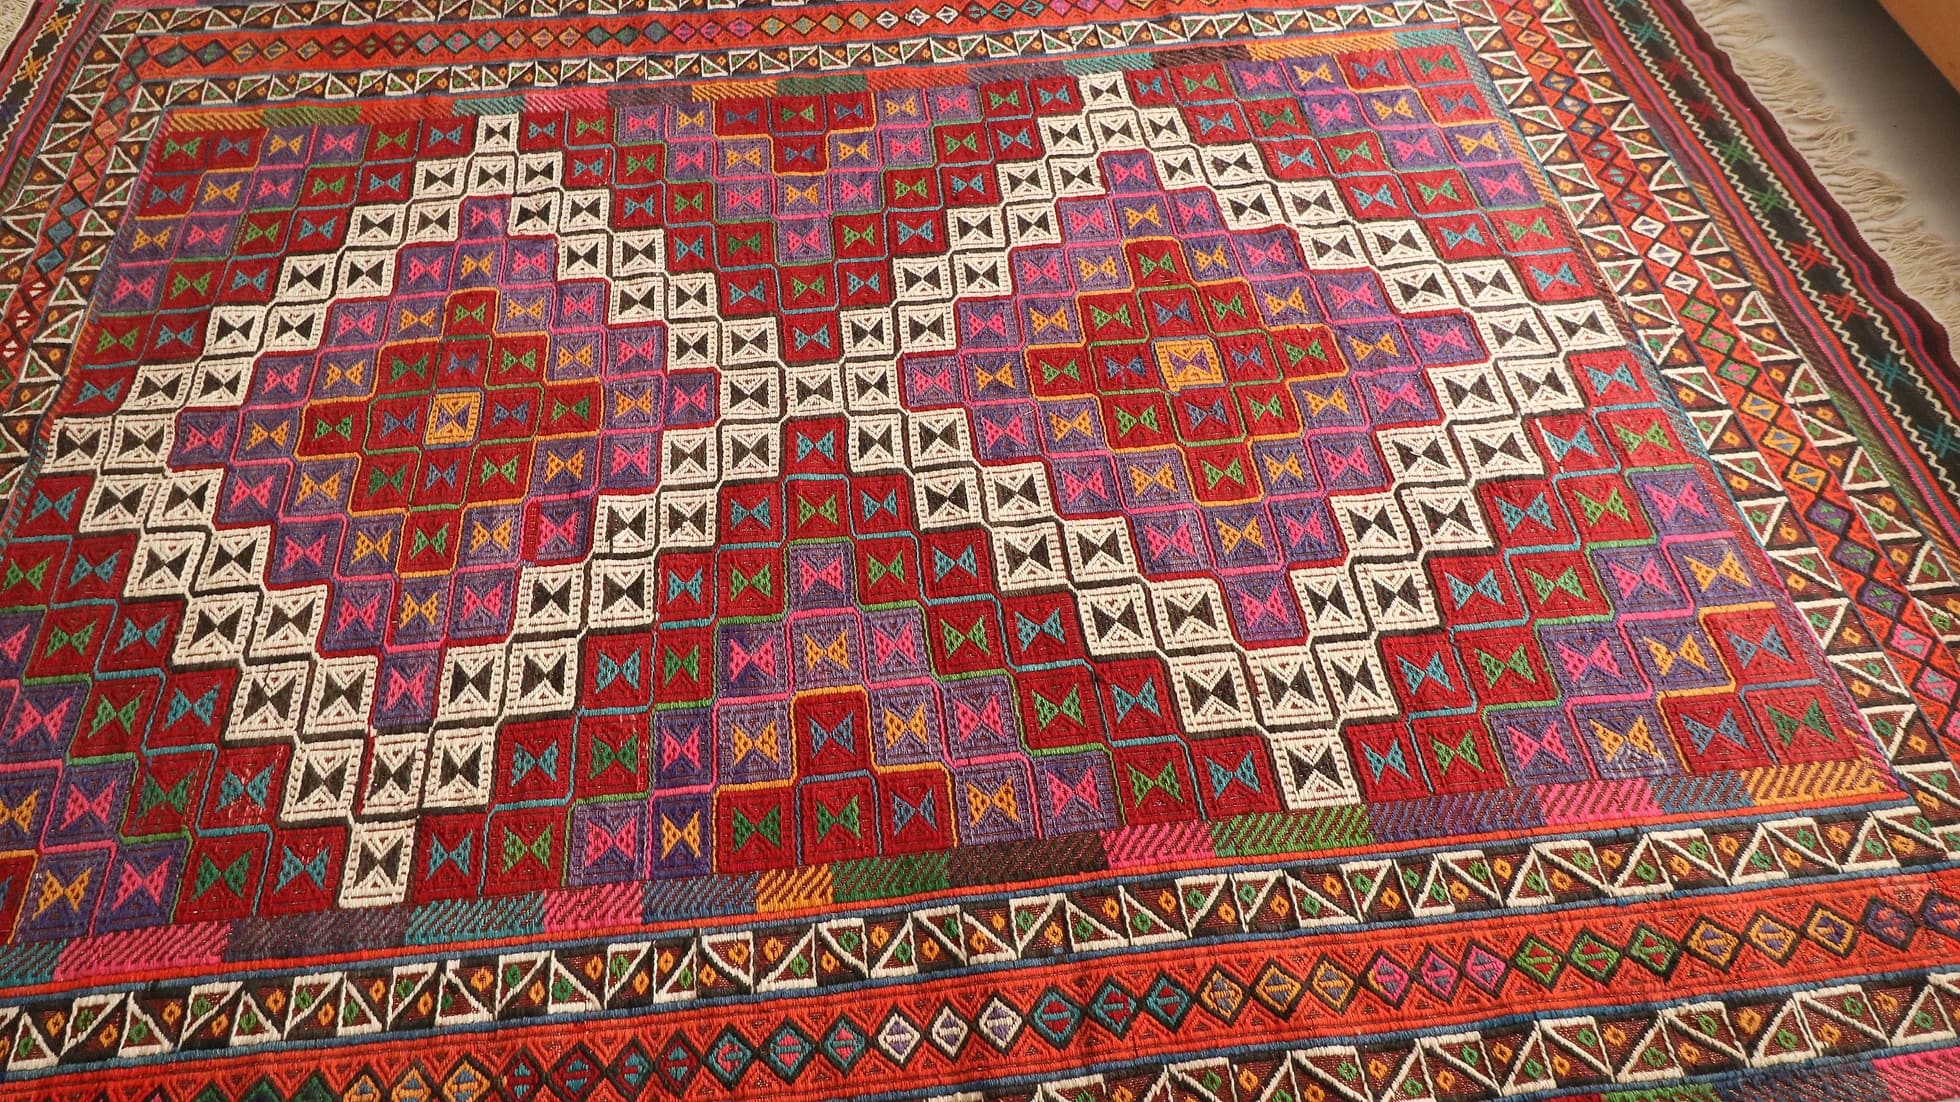 Vintage Cecim Kilim Rug in vibrant colors such as red, purple and pink